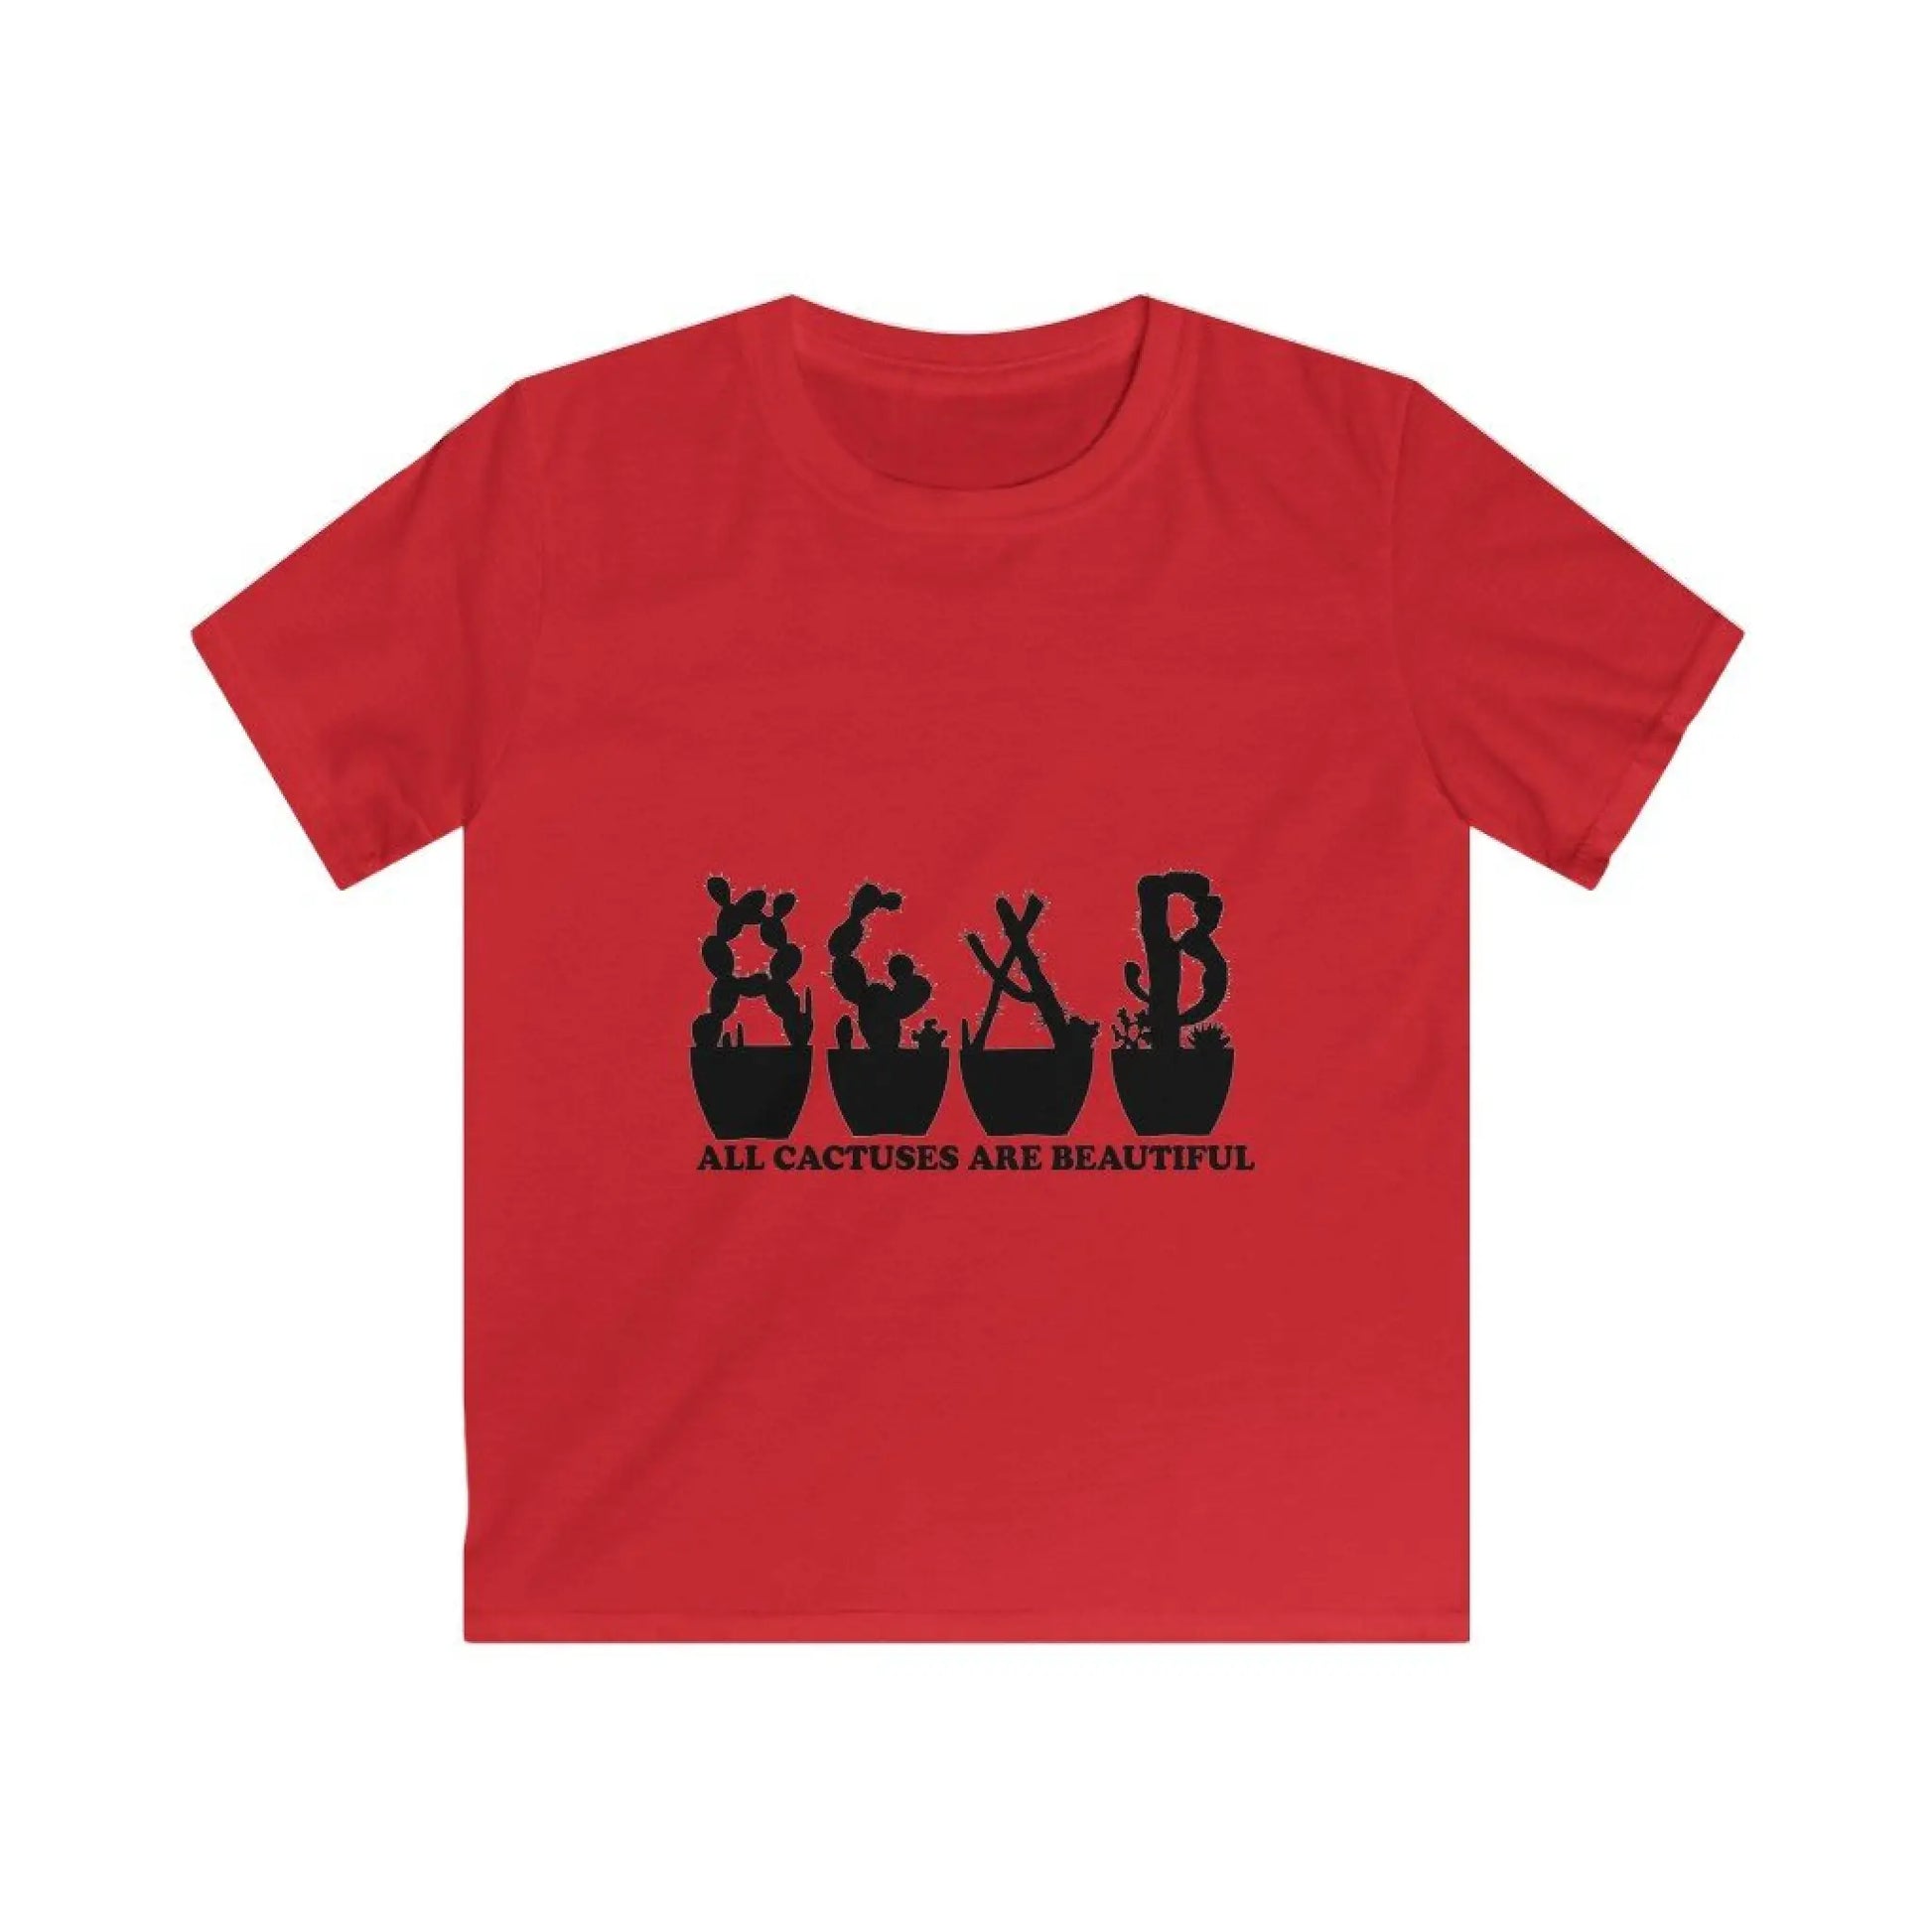 Kids Tee - All Cactuses Are Beautiful - L / Red - clothes